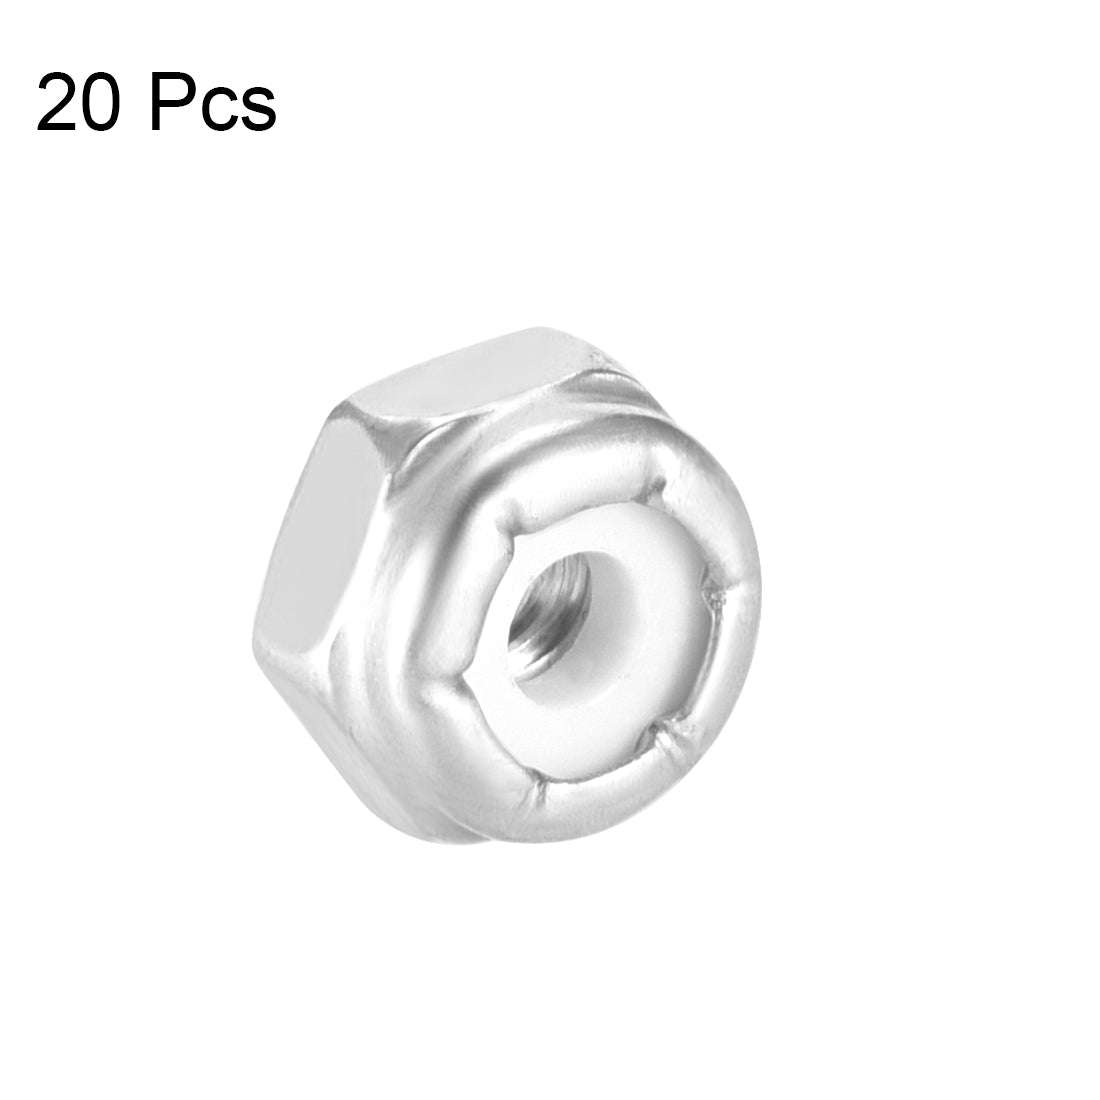 uxcell Uxcell 6#-32 Nylon Insert Hex Lock Nuts, 304 Stainless Steel, Plain Finish, 20 Pcs